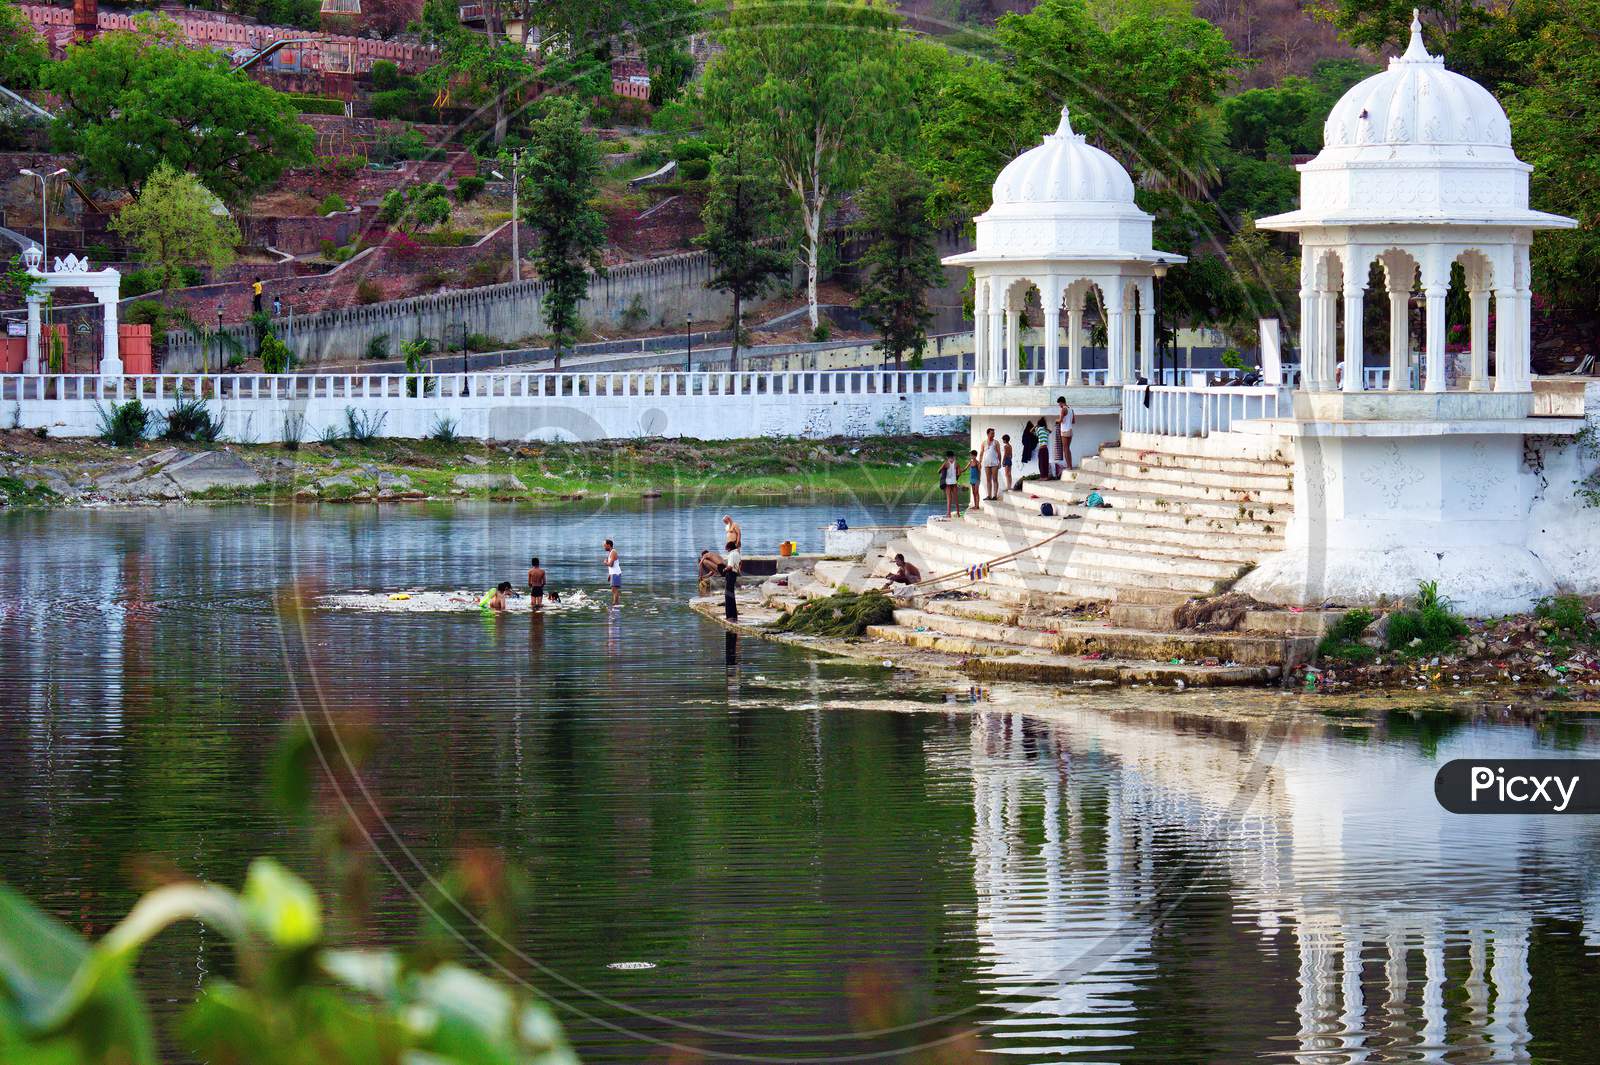 Udaipur, India - May 22, 2013: People By The Lake Located In Doodh Talai Musical Garden In Rajasthan State